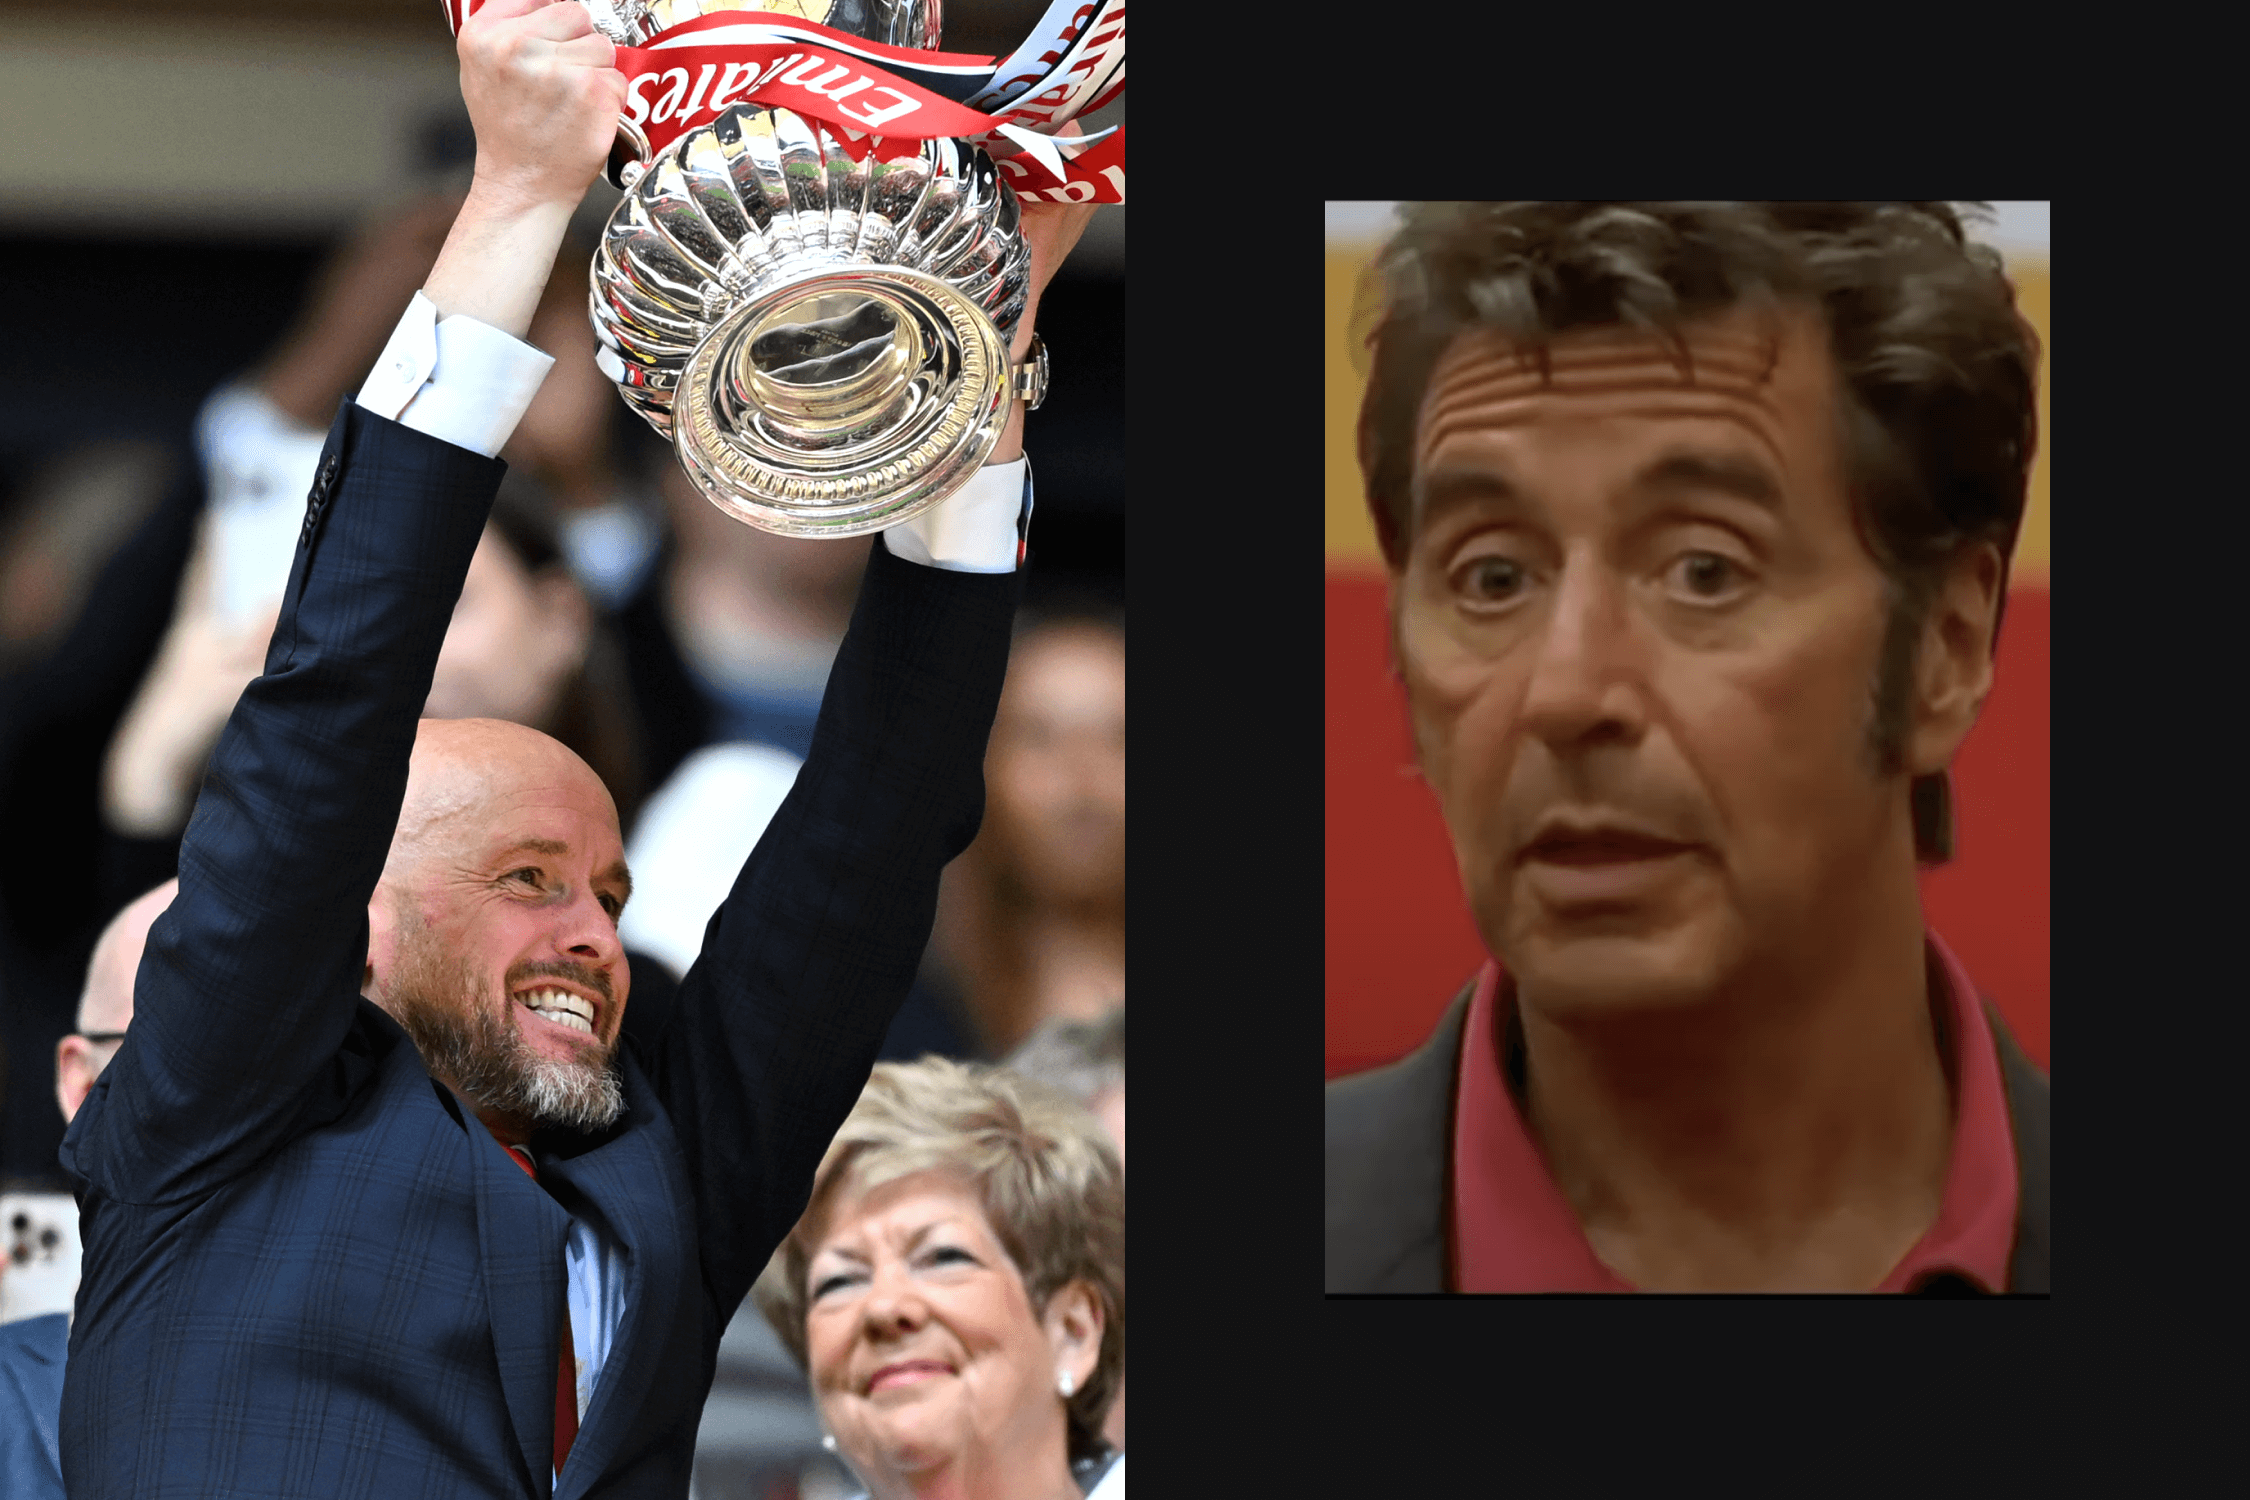 Ten Hag used Al Pacino's Any Given Sunday speech to motivate Man United before FA Cup final